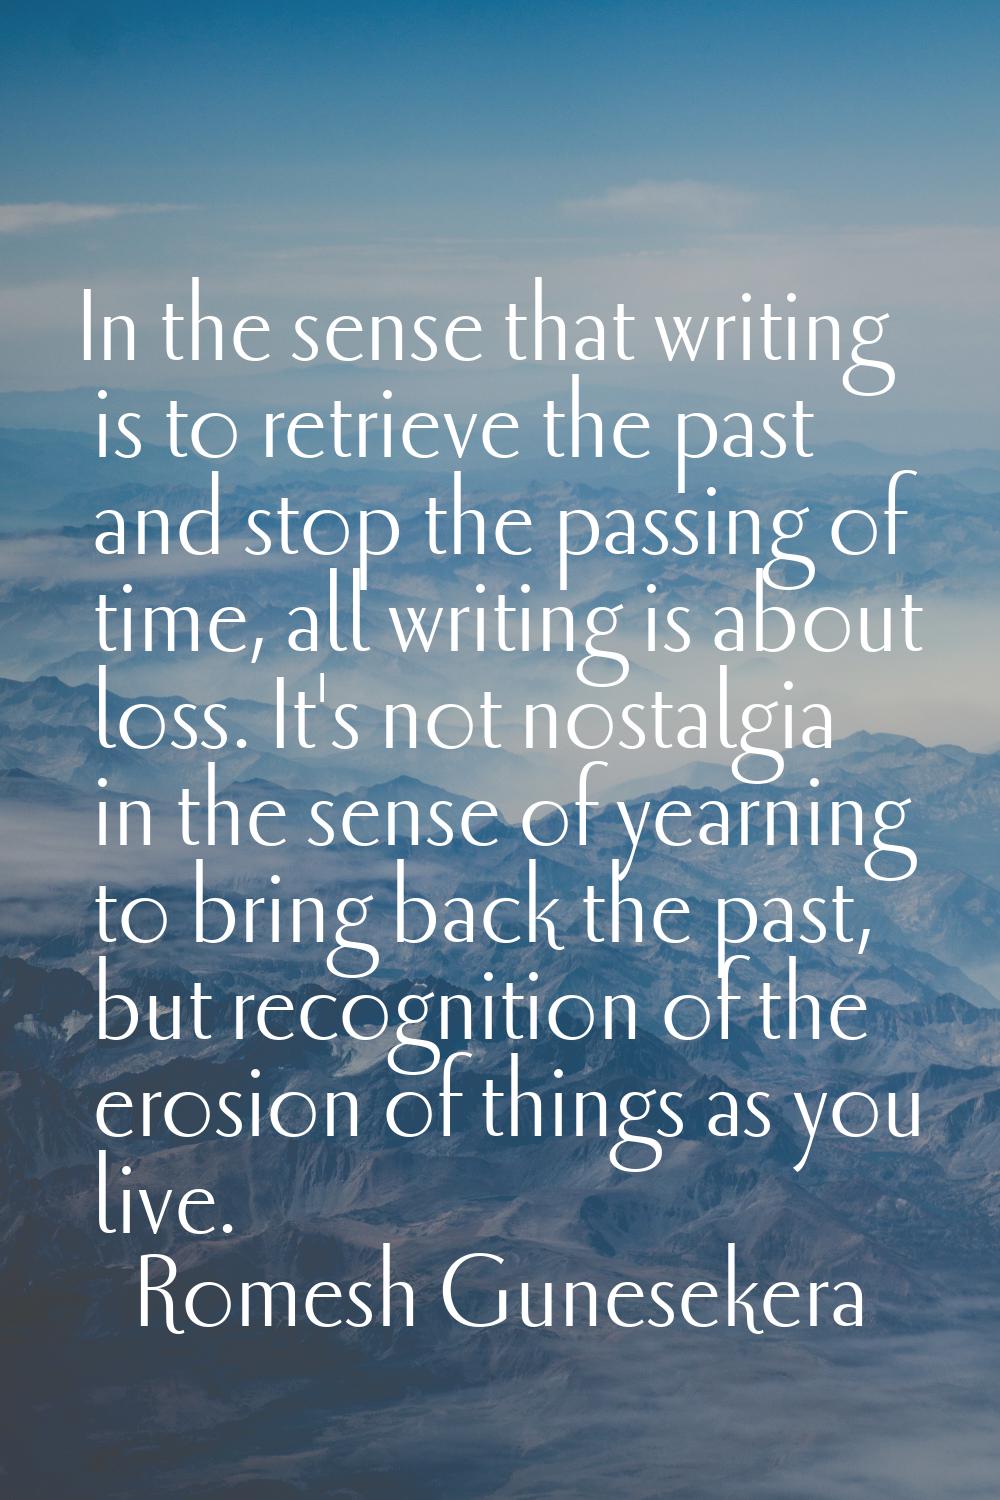 In the sense that writing is to retrieve the past and stop the passing of time, all writing is abou